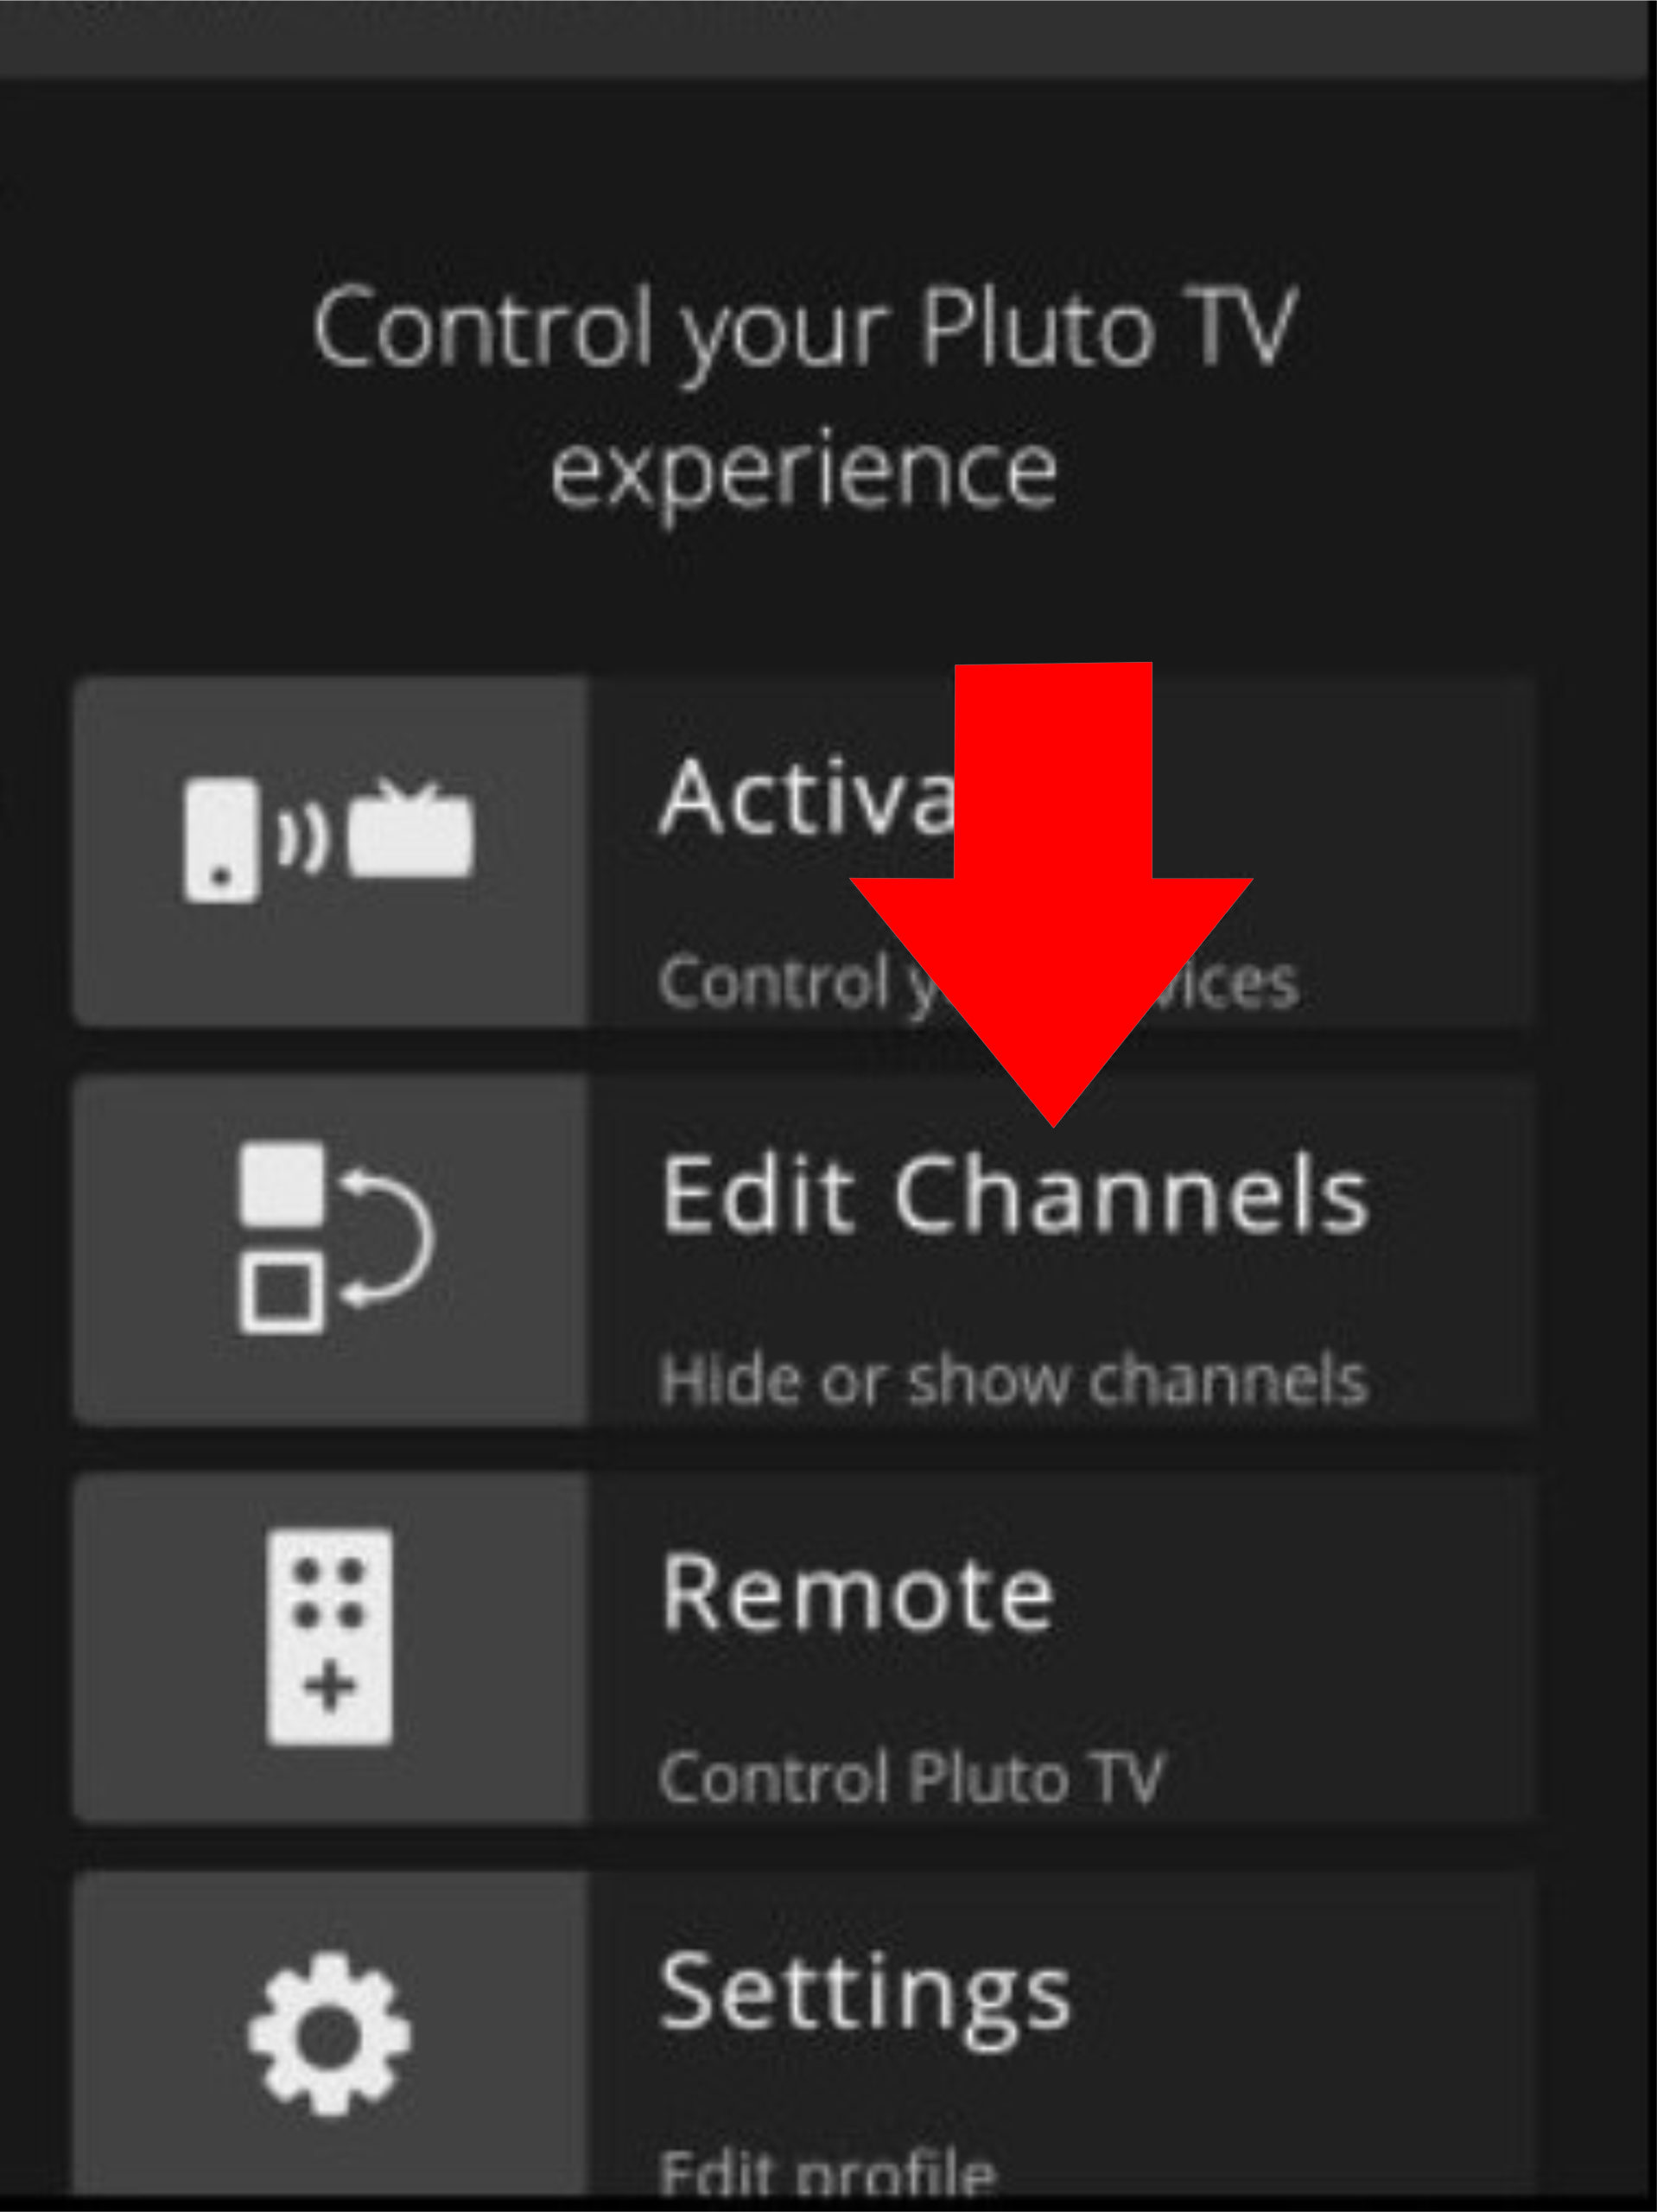 How to Add Channels to Pluto TV